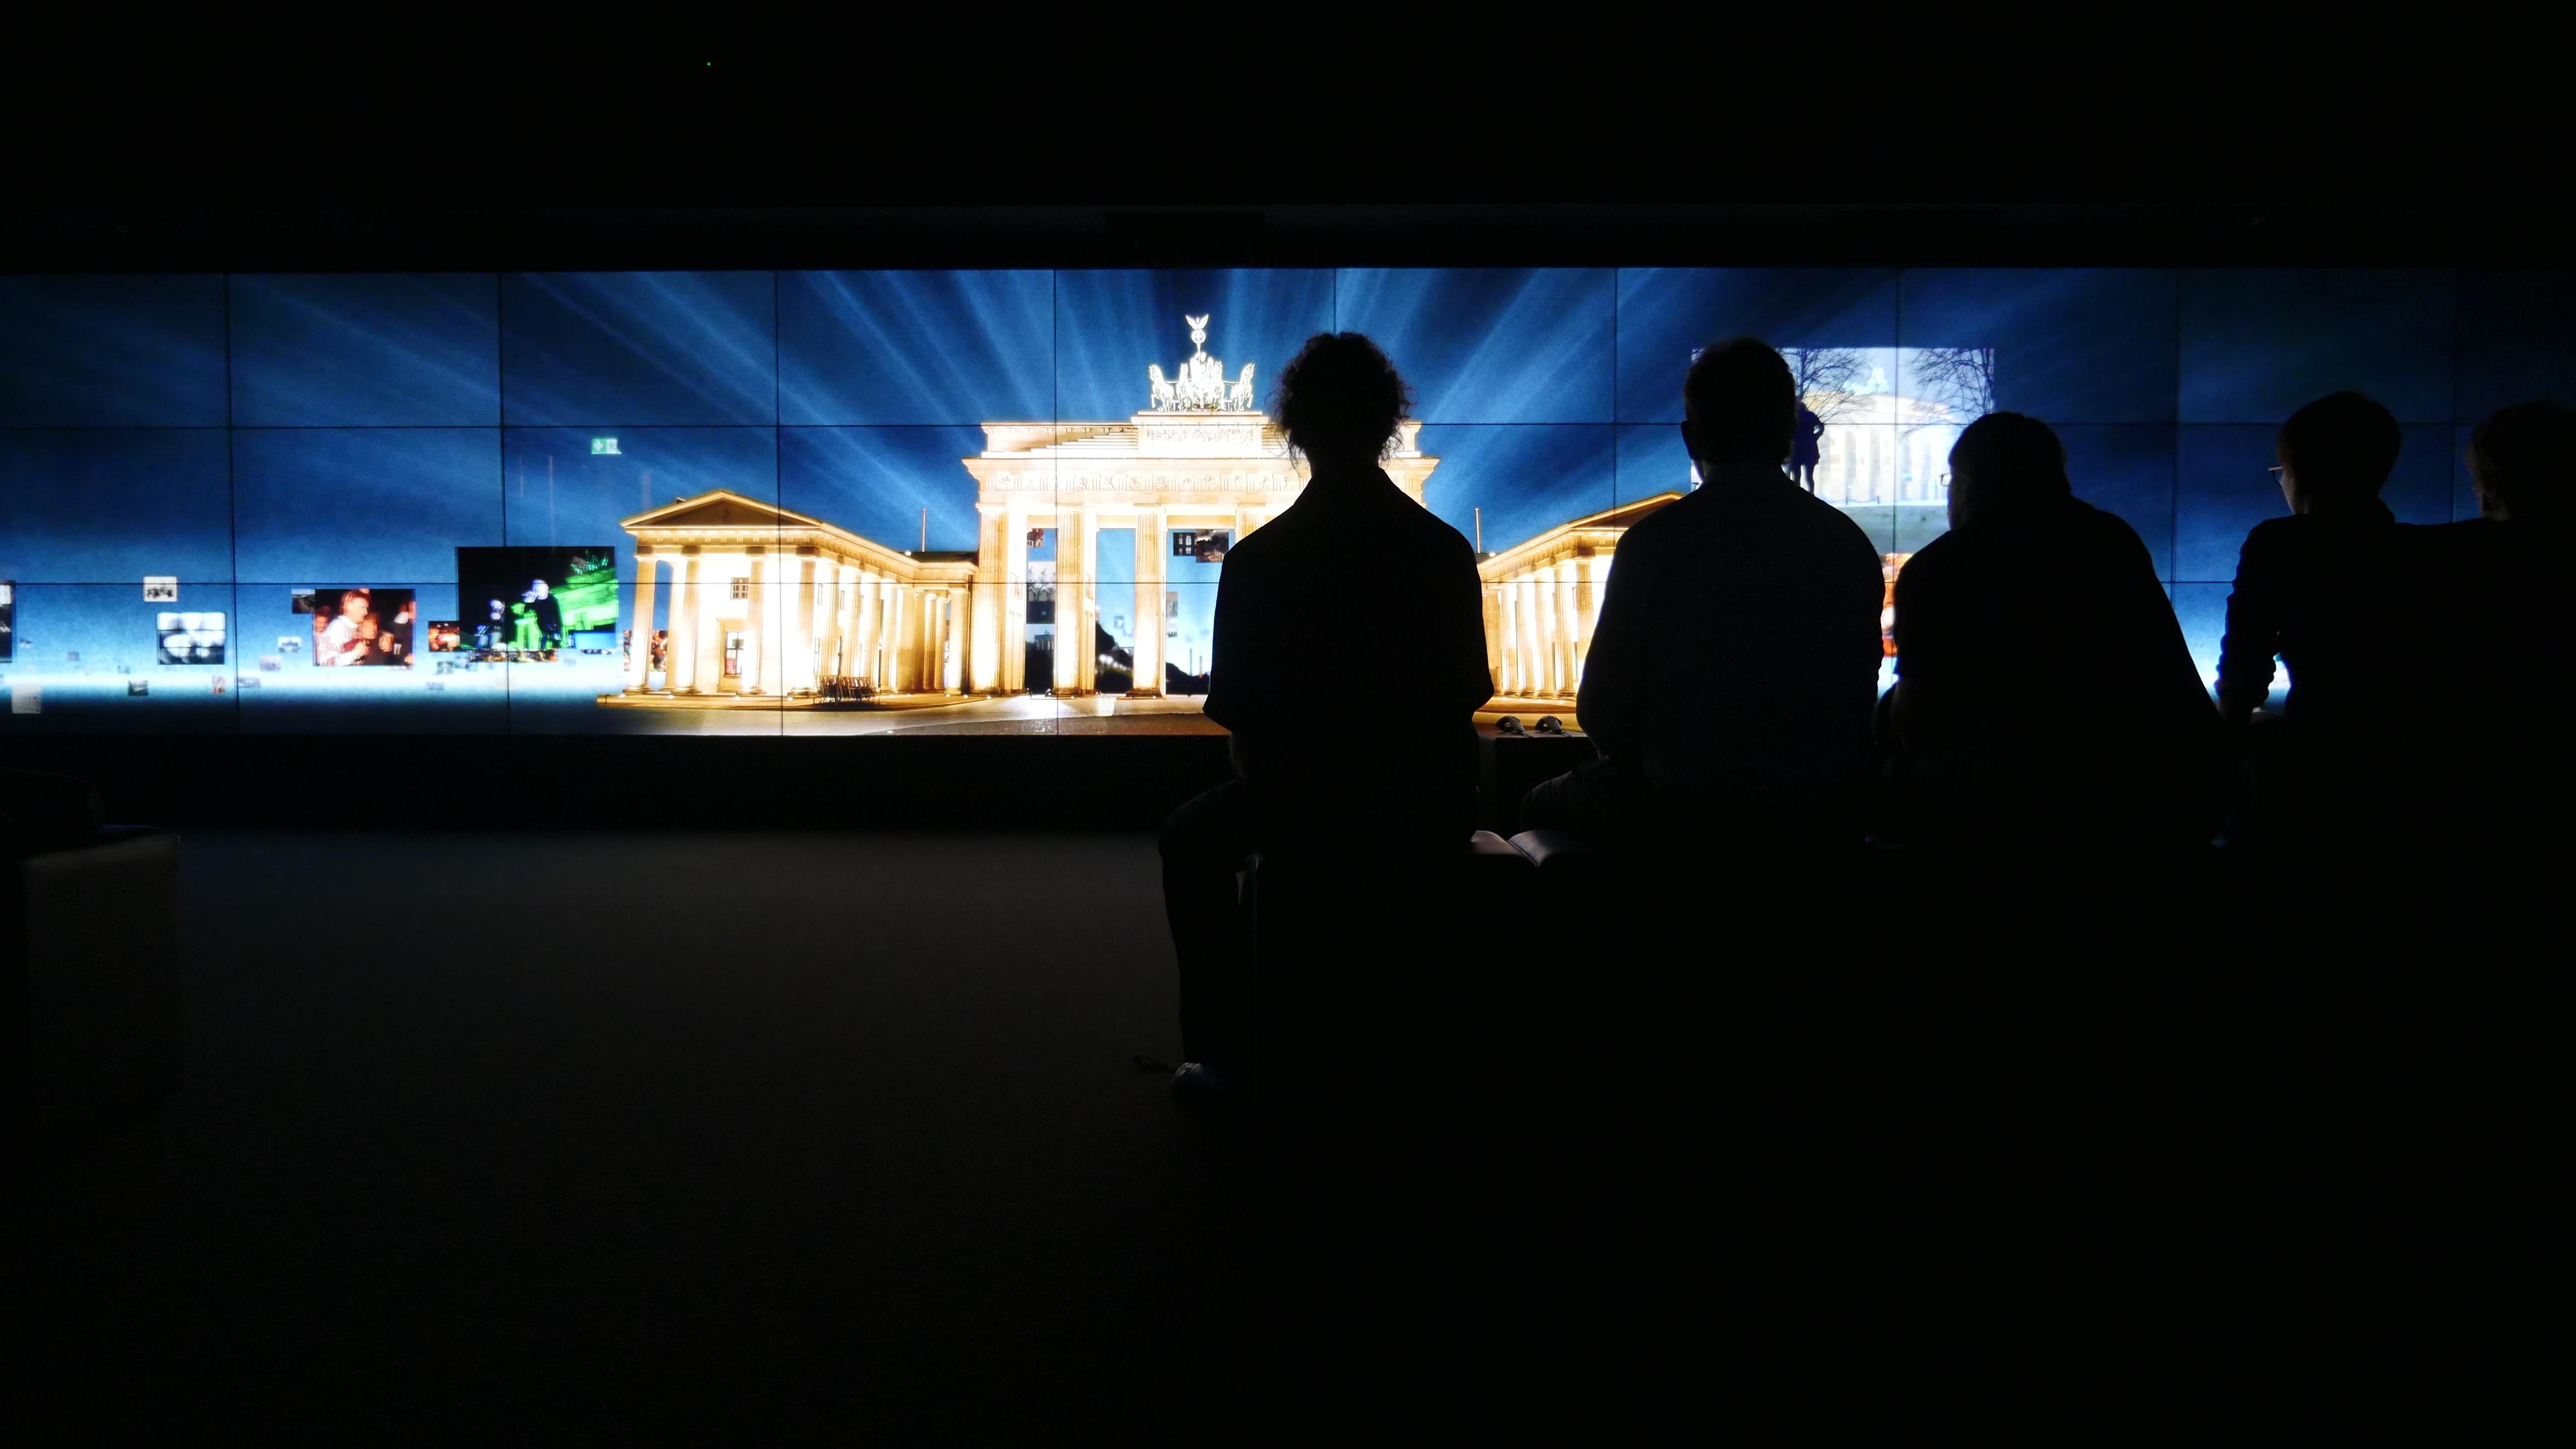 photo: Panasonic media screens used to tell the story of Berlin through the history of the Brandenburger Gate at Brandenburger Gate Museum